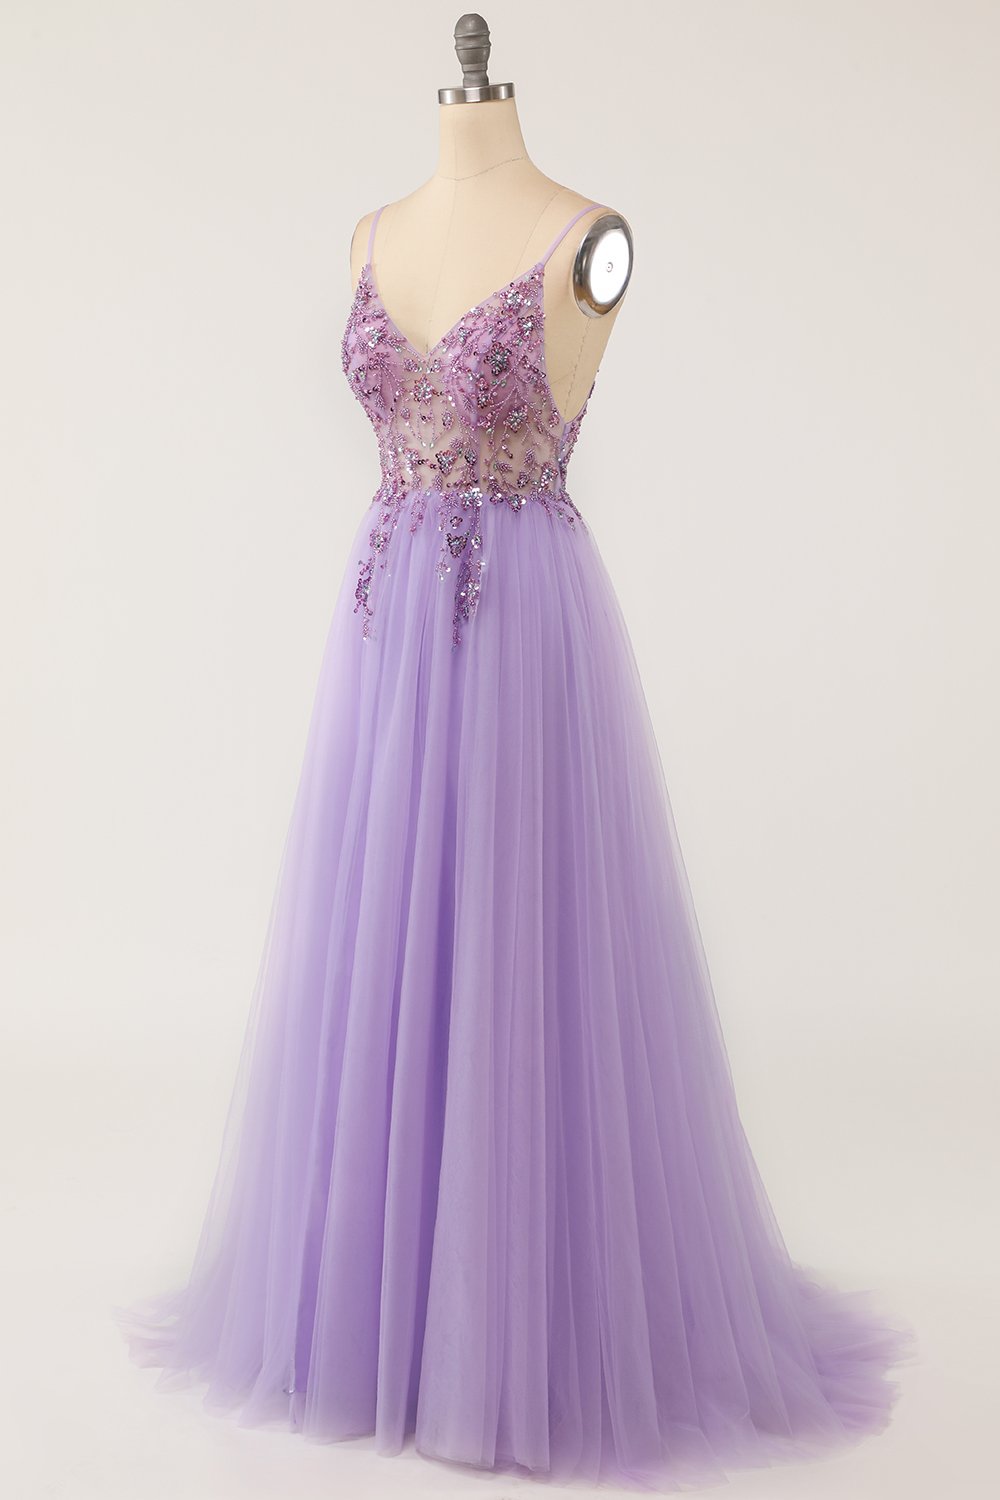 Tulle Layered Purple A-Line Evening Formal Dress Long Prom Dress – Bohogown